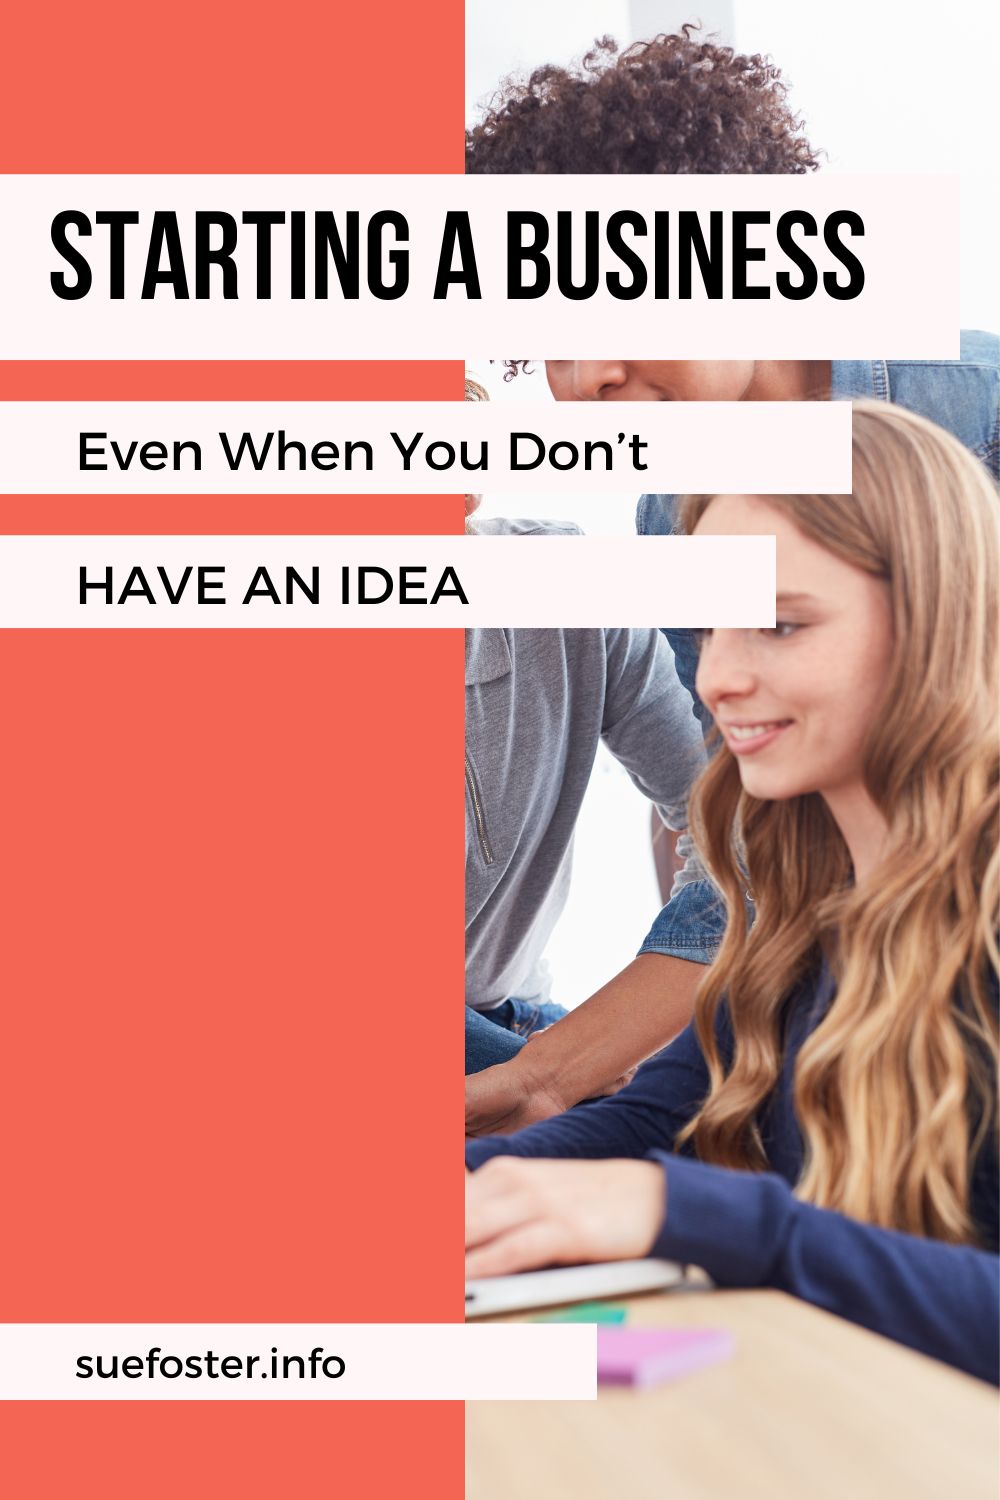 Learn how to start a business without a groundbreaking idea. Explore market gaps, consider franchises, or team up with a partner for success.